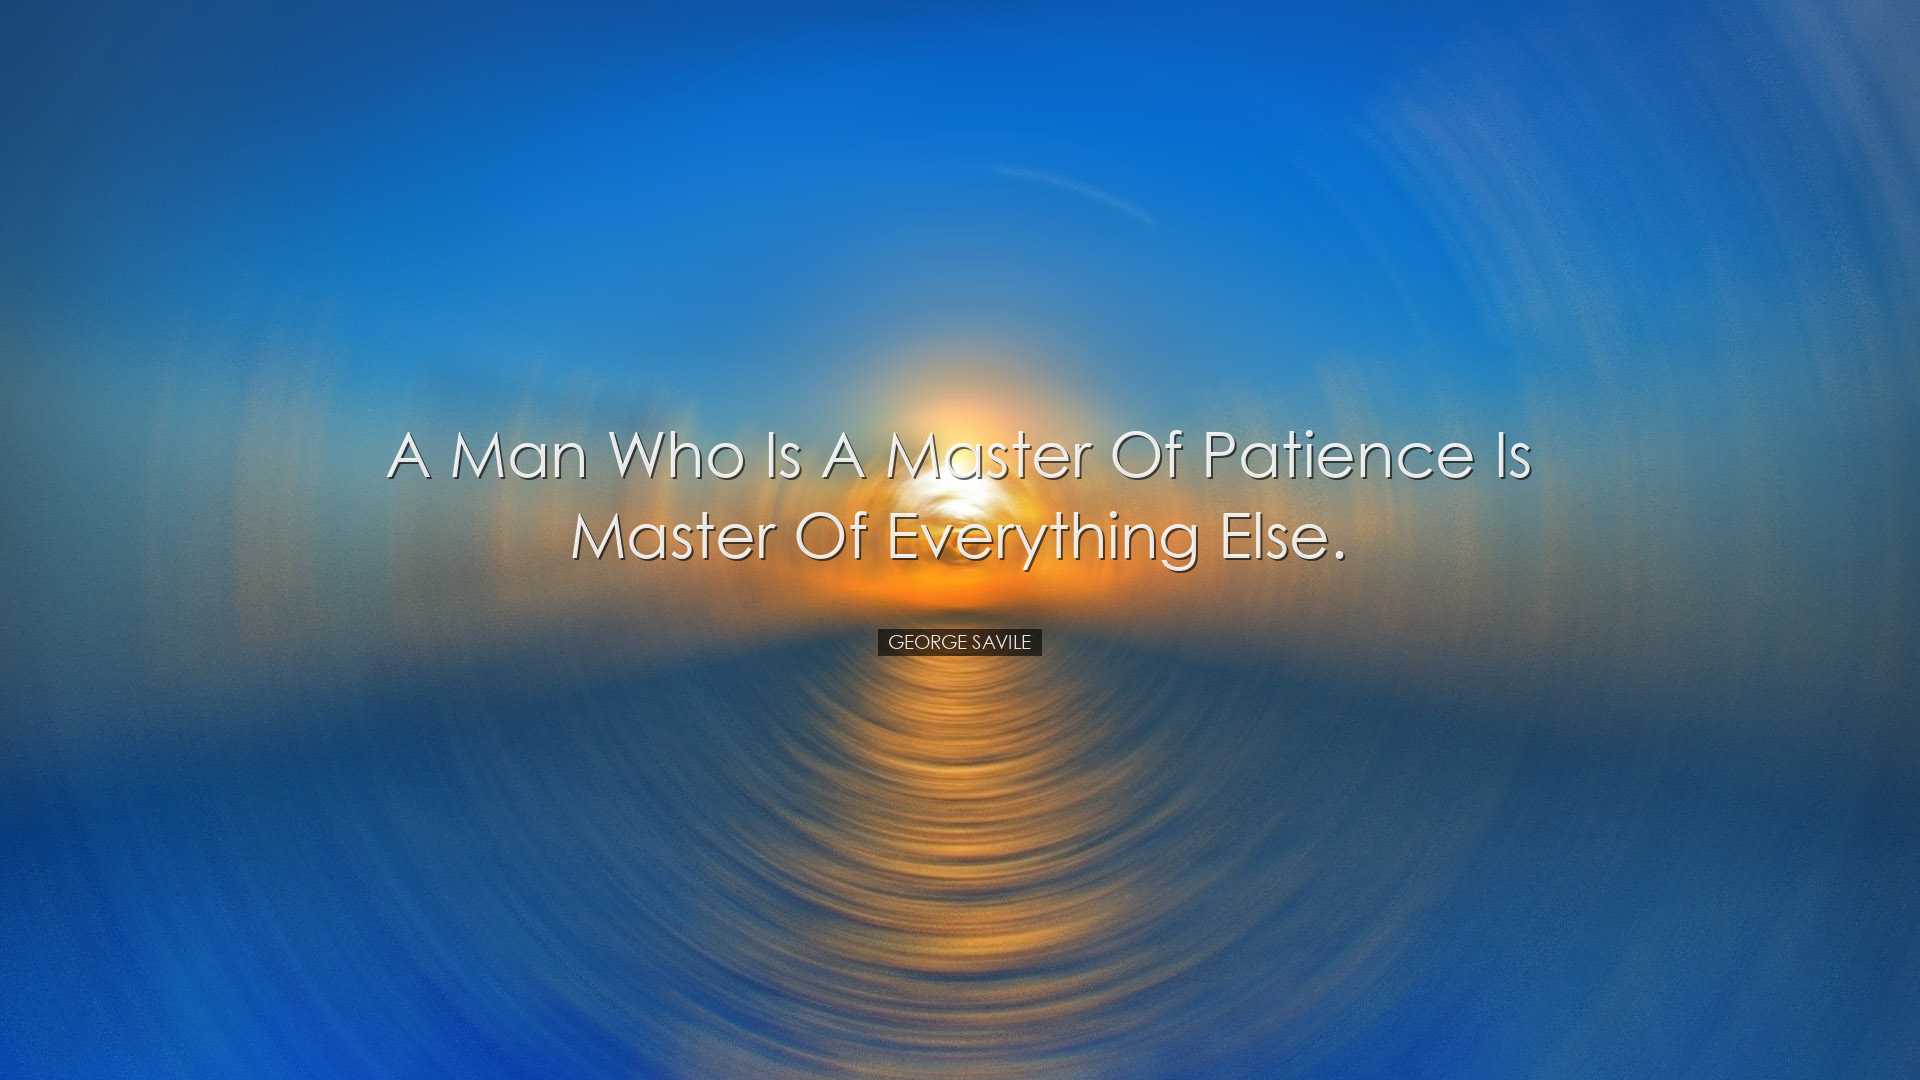 A man who is a master of patience is master of everything else. -